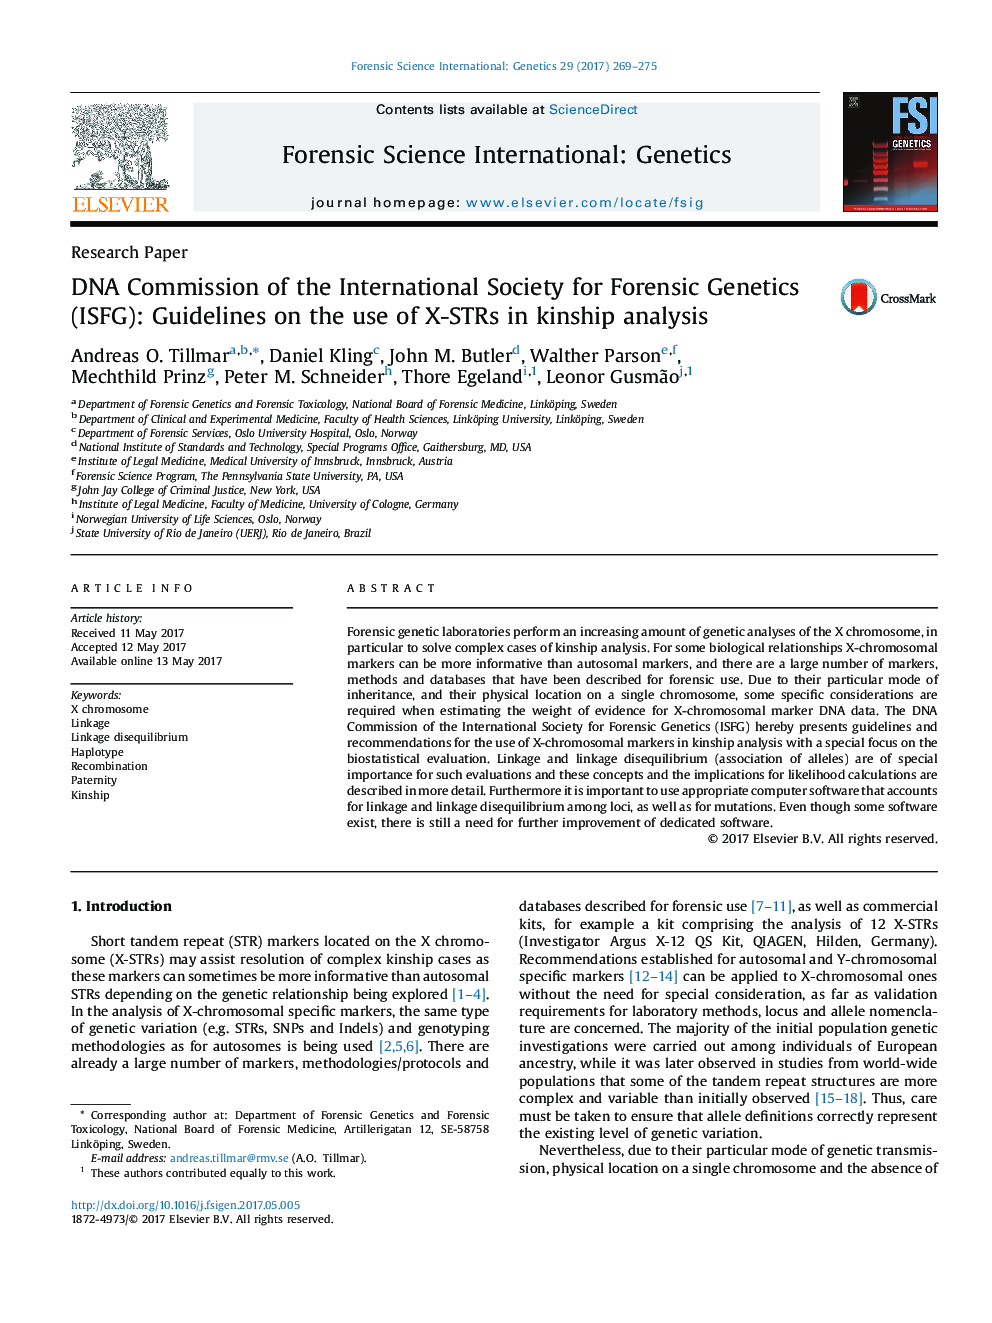 DNA Commission of the International Society for Forensic Genetics (ISFG): Guidelines on the use of X-STRs in kinship analysis